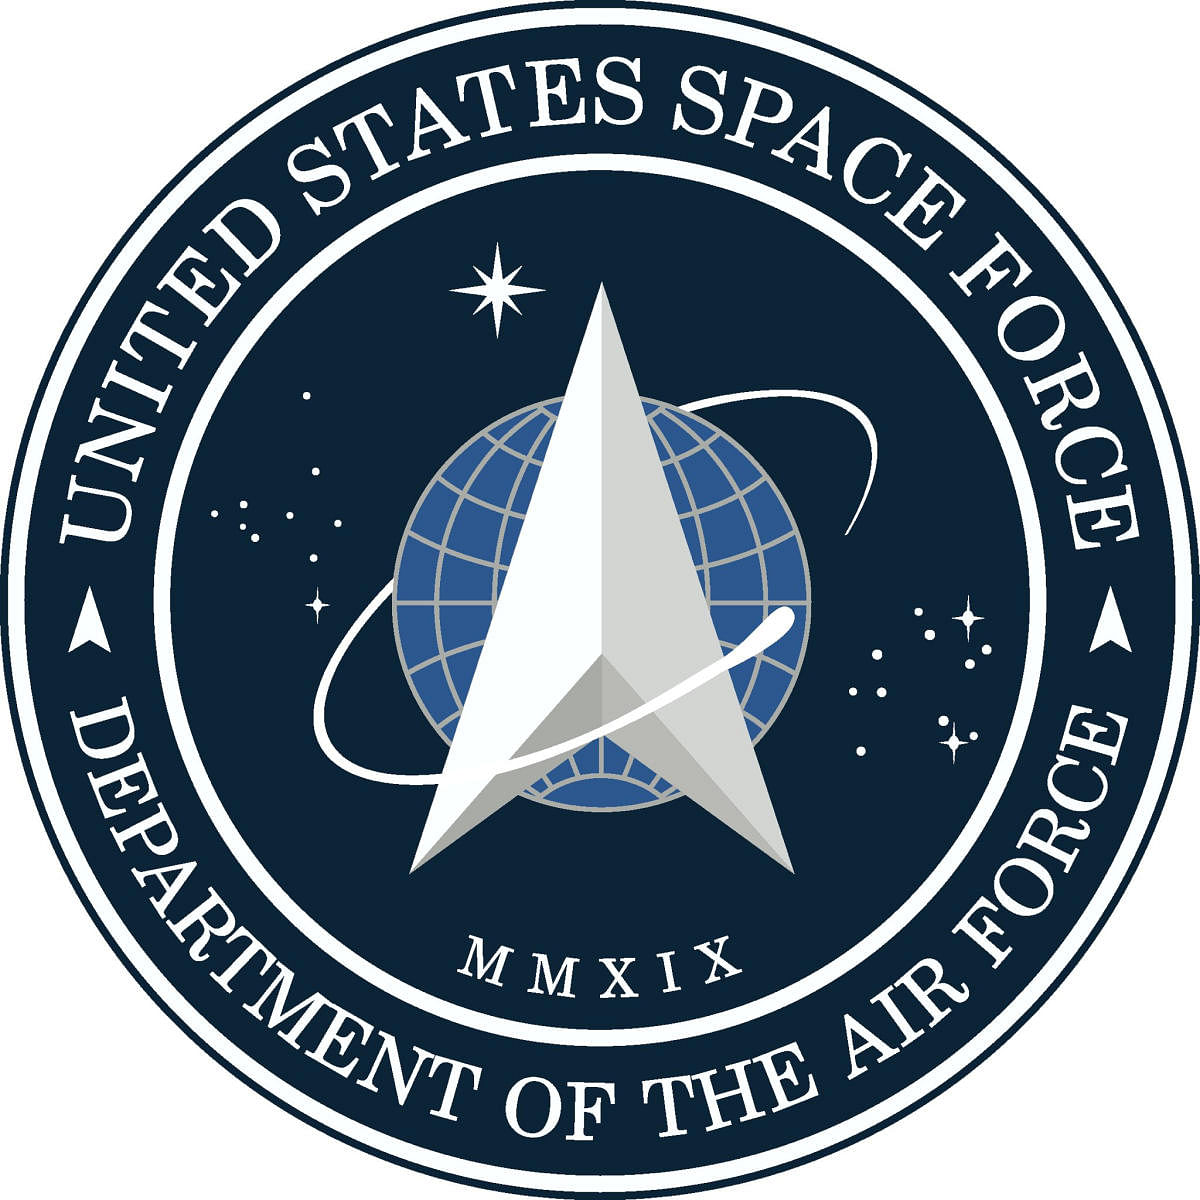 A new logo for the US Space Force being added by the Trump administration as a sixth branch of the US military, is seen in this handout image released by US President Donald Trump from the White House in Washington, U.S. January 24, 2020. (Photo: The Whit